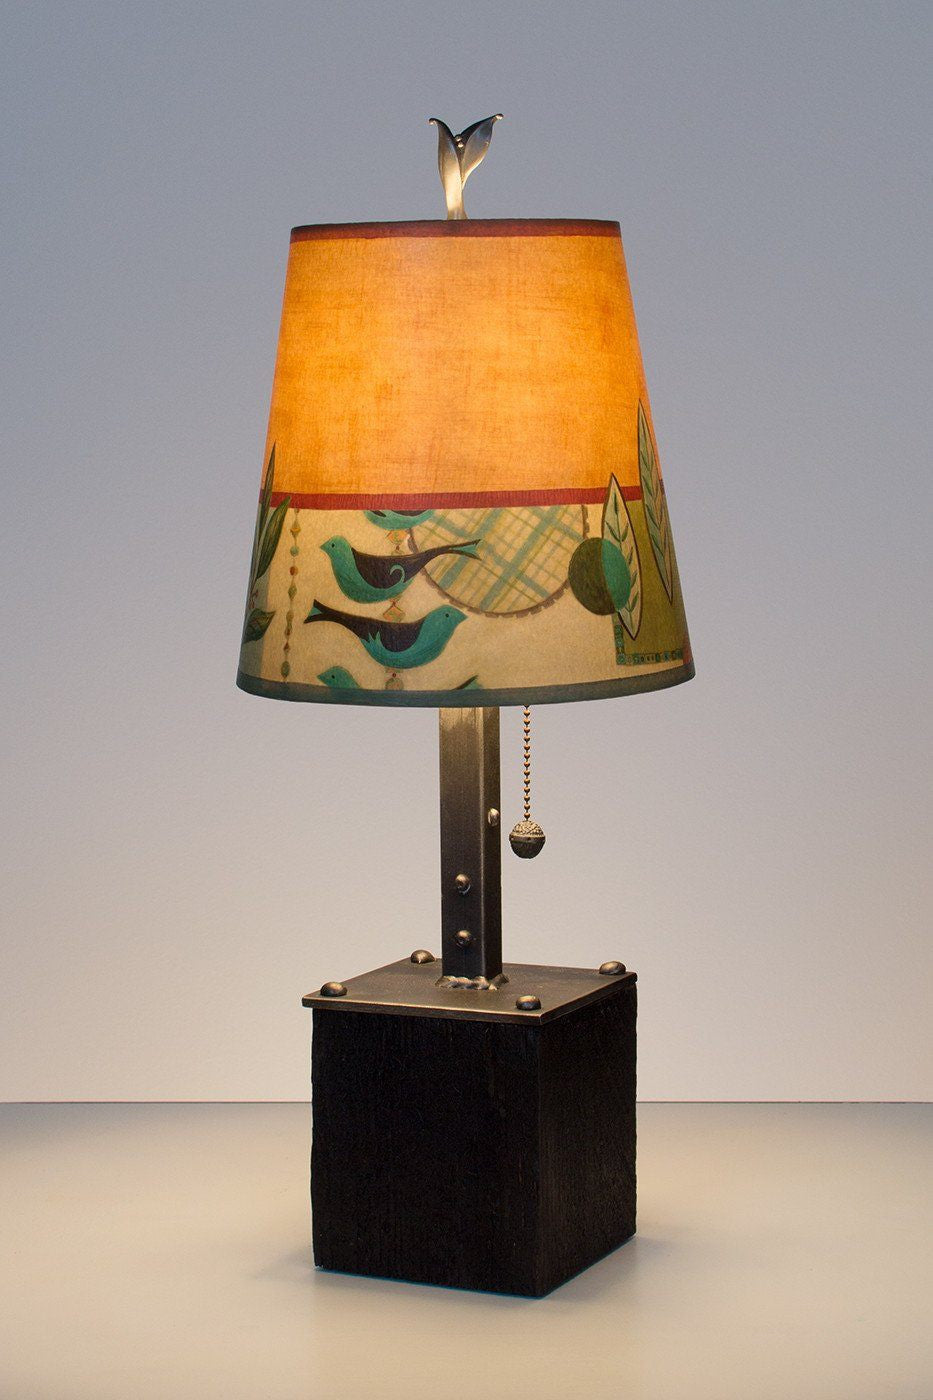 Janna Ugone & Co Table Lamps Steel Table Lamp on Reclaimed Wood with Small Drum Shade in New Capri Spice